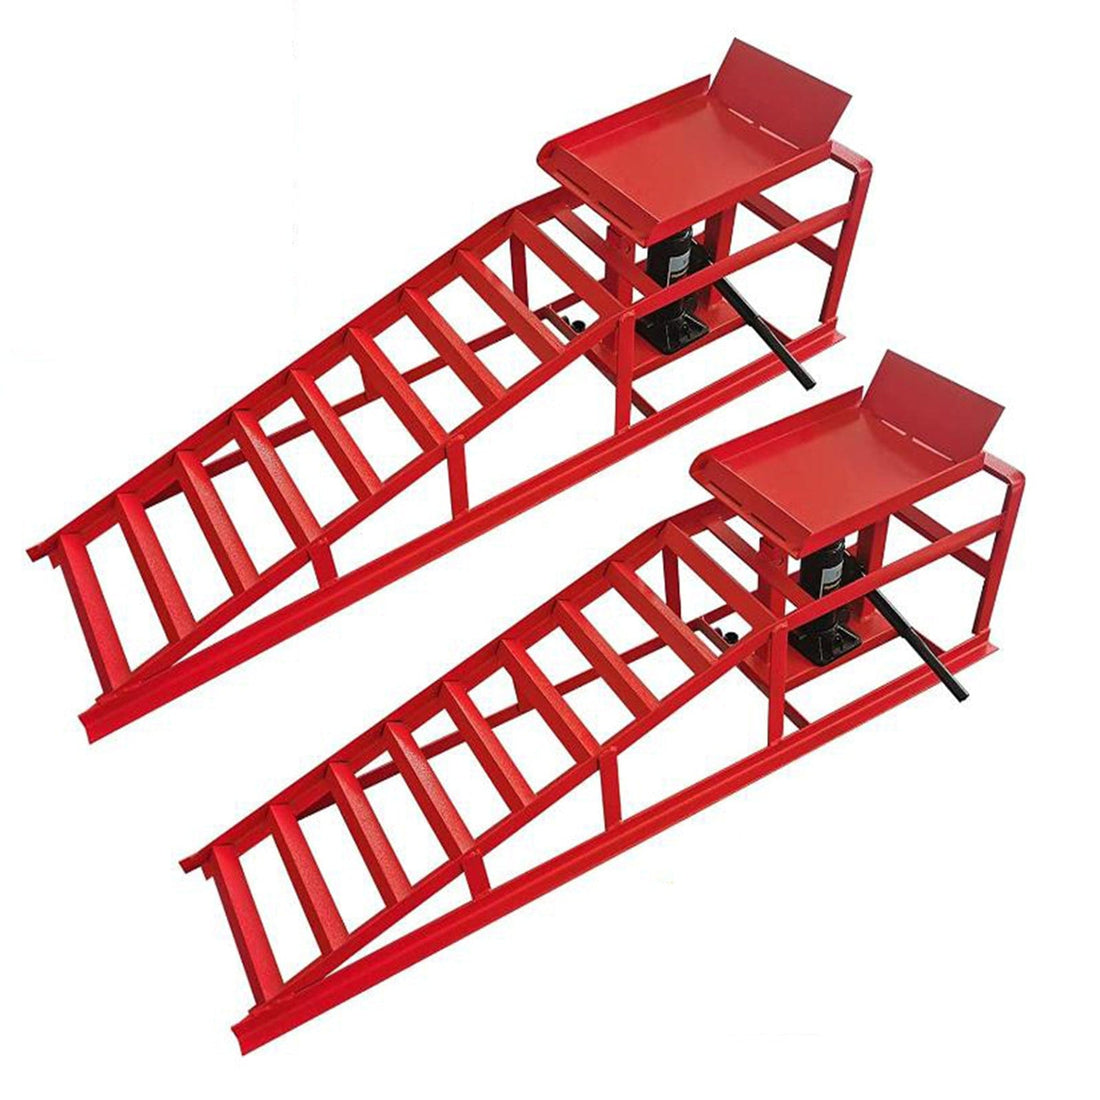 2-Pack 5T Auto Service Ramps - 10000lbs Capacity, 7.7-13" Adjustable Lift, Heavy-Duty Steel, Ideal for Low Vehicles & Sports Cars